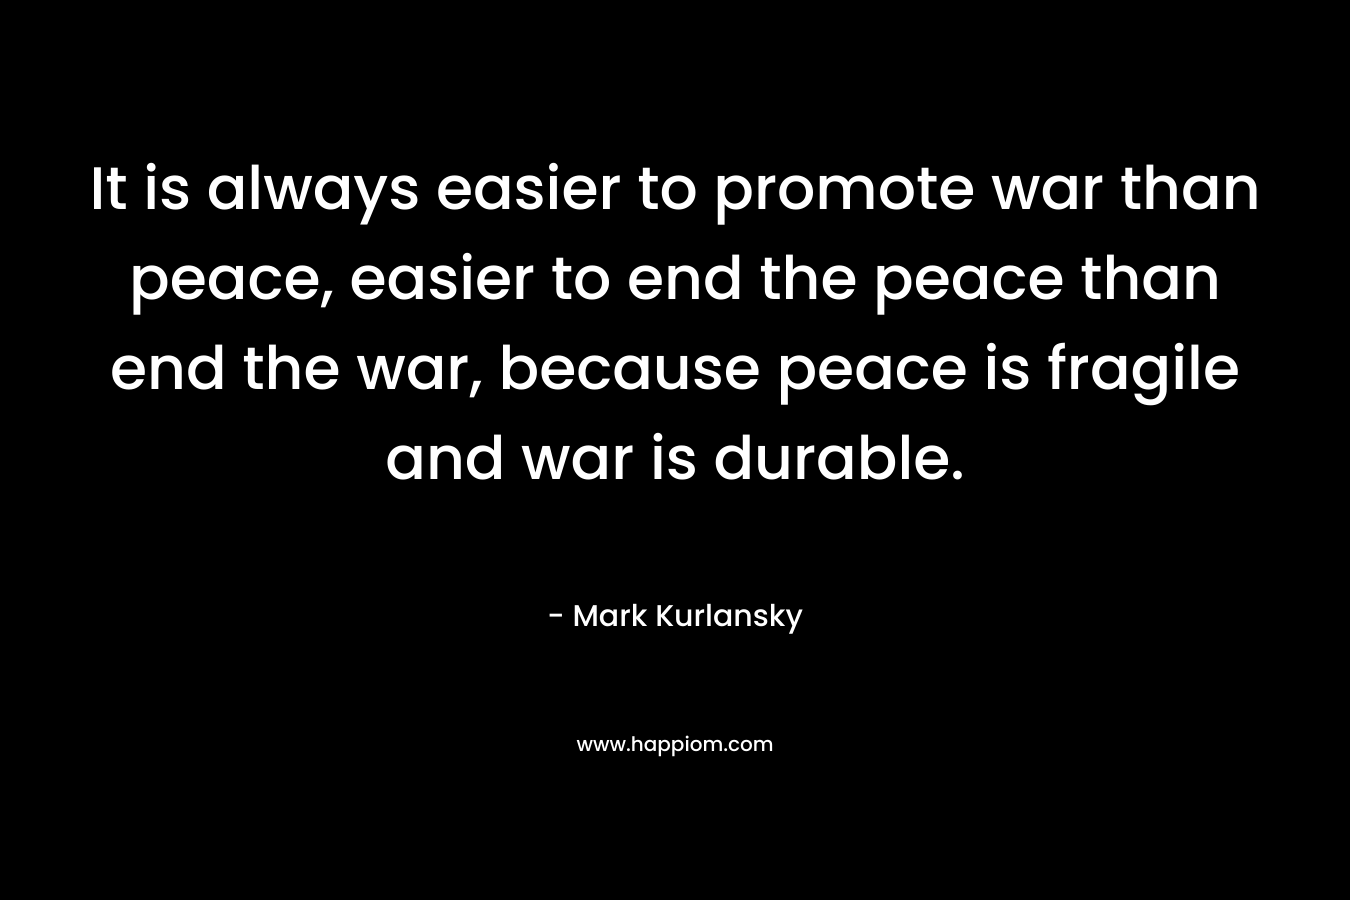 It is always easier to promote war than peace, easier to end the peace than end the war, because peace is fragile and war is durable. – Mark Kurlansky